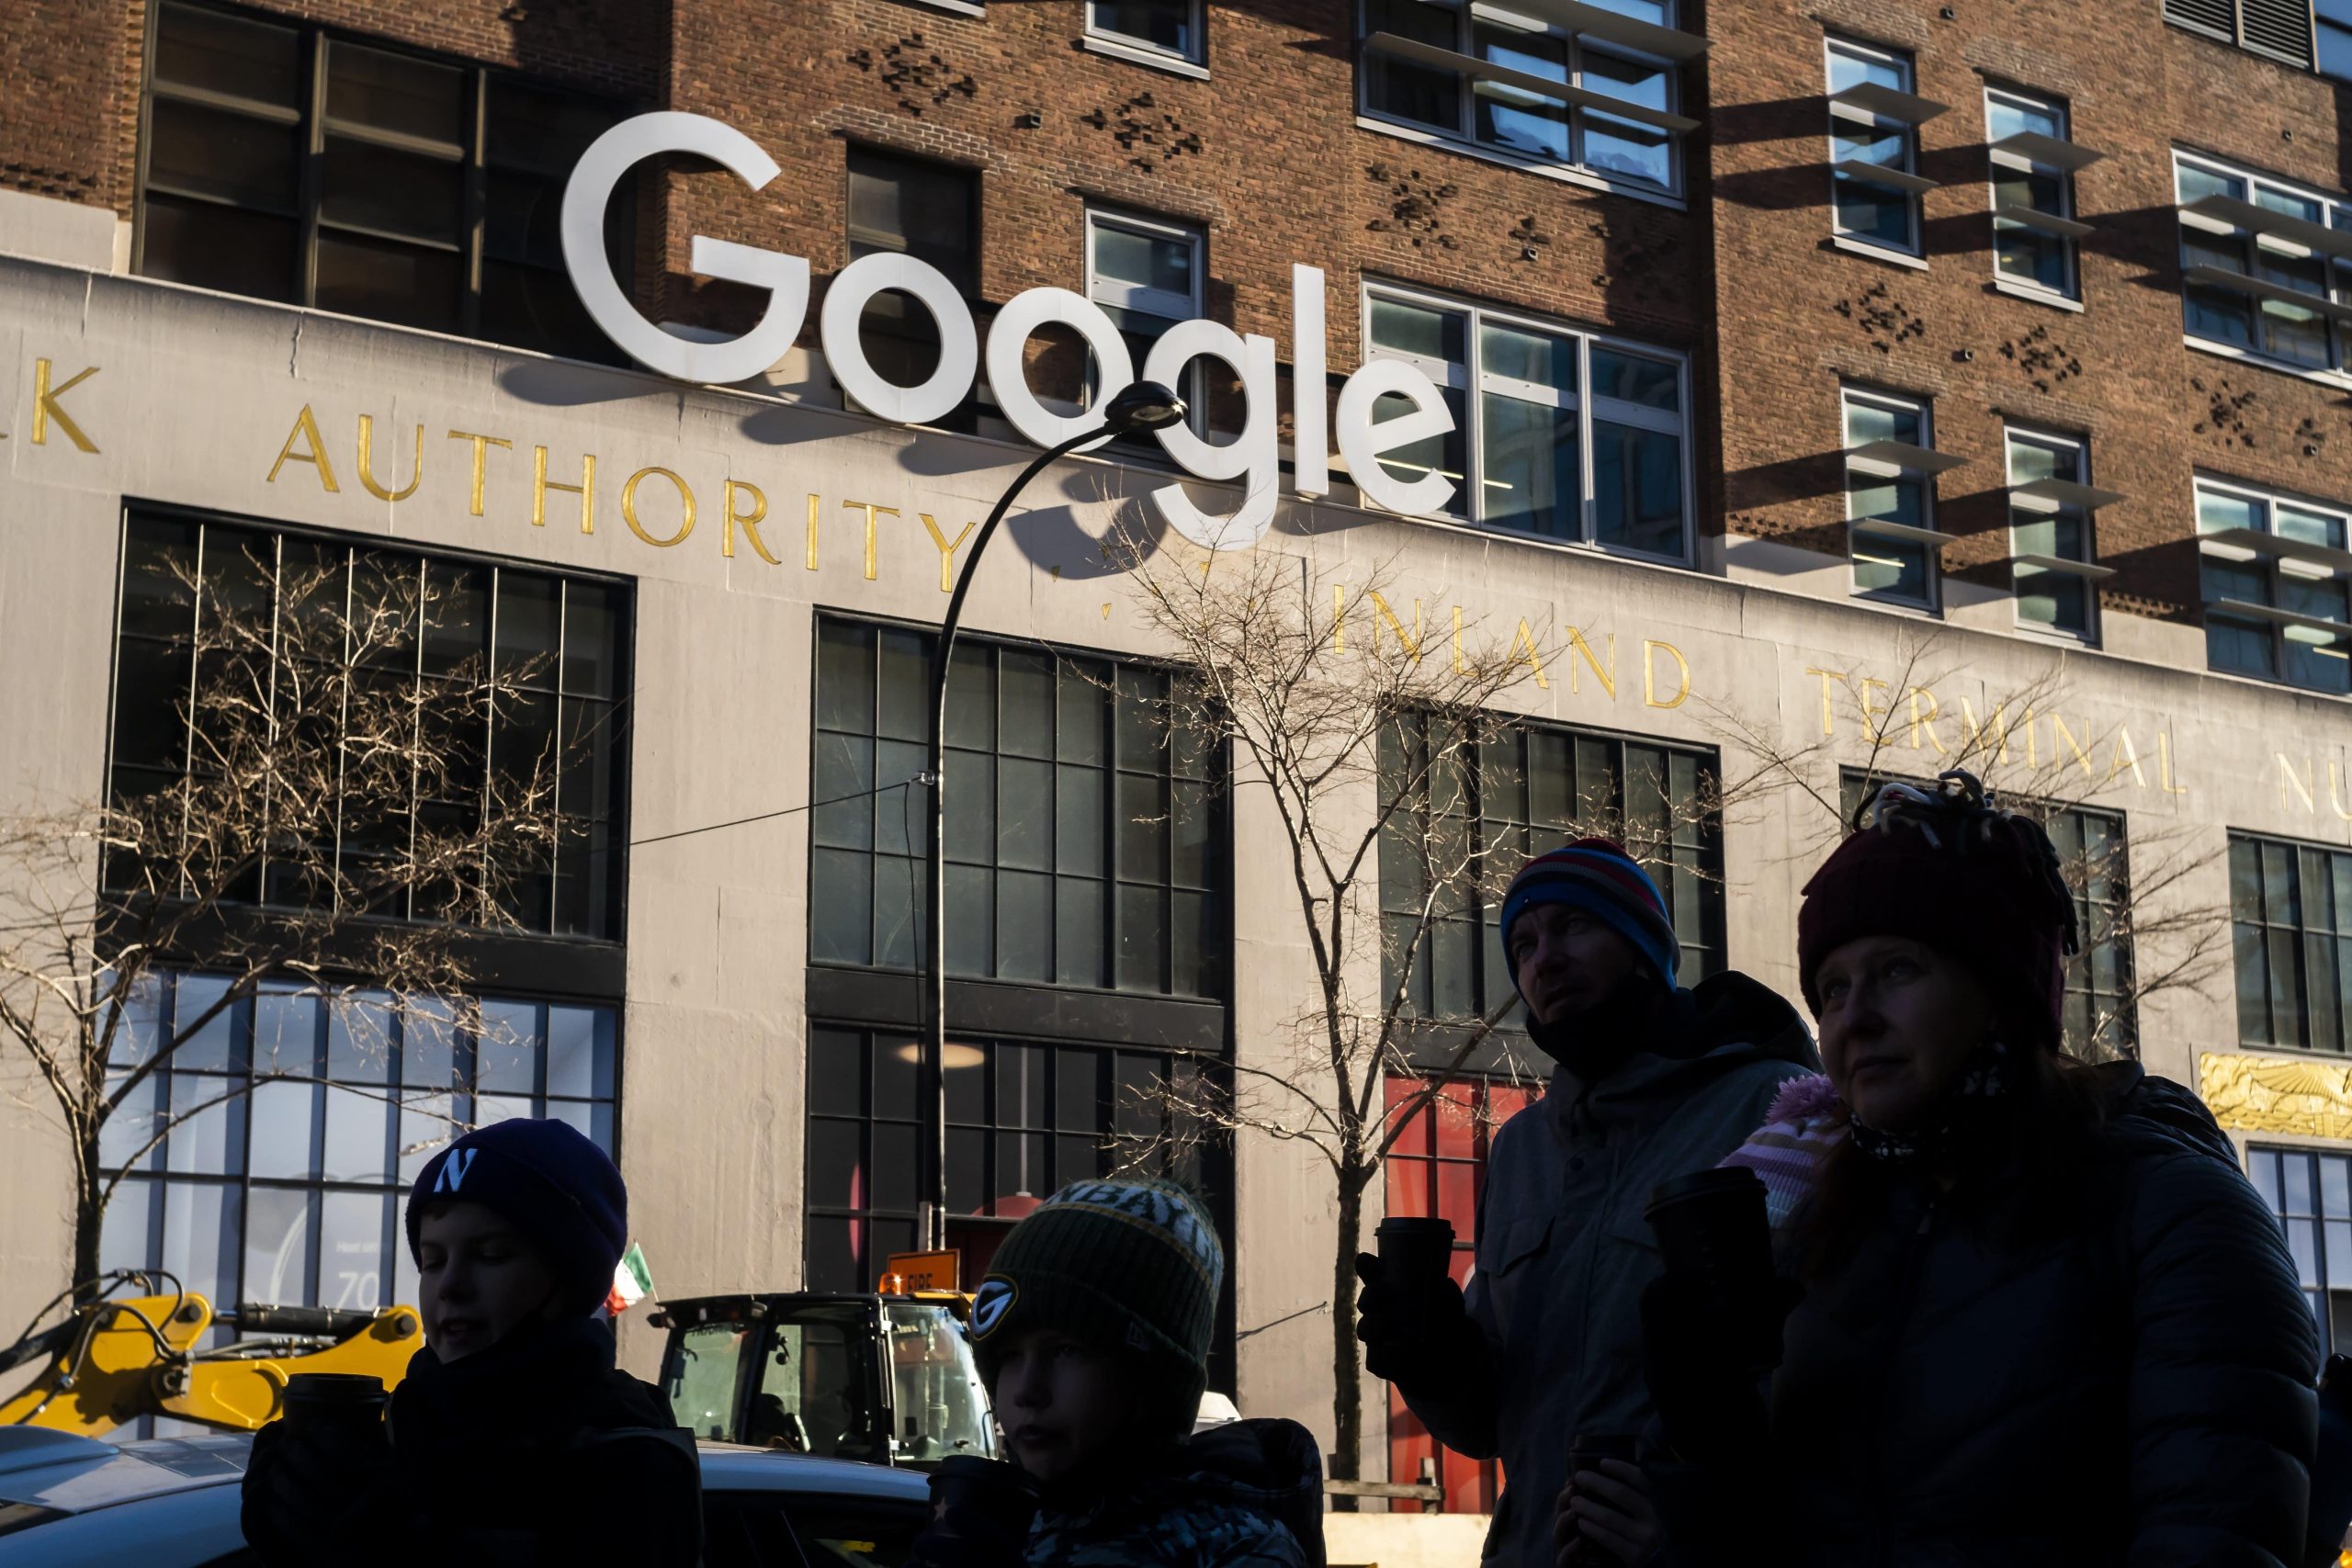 These are the amounts Google pays publishers for their news